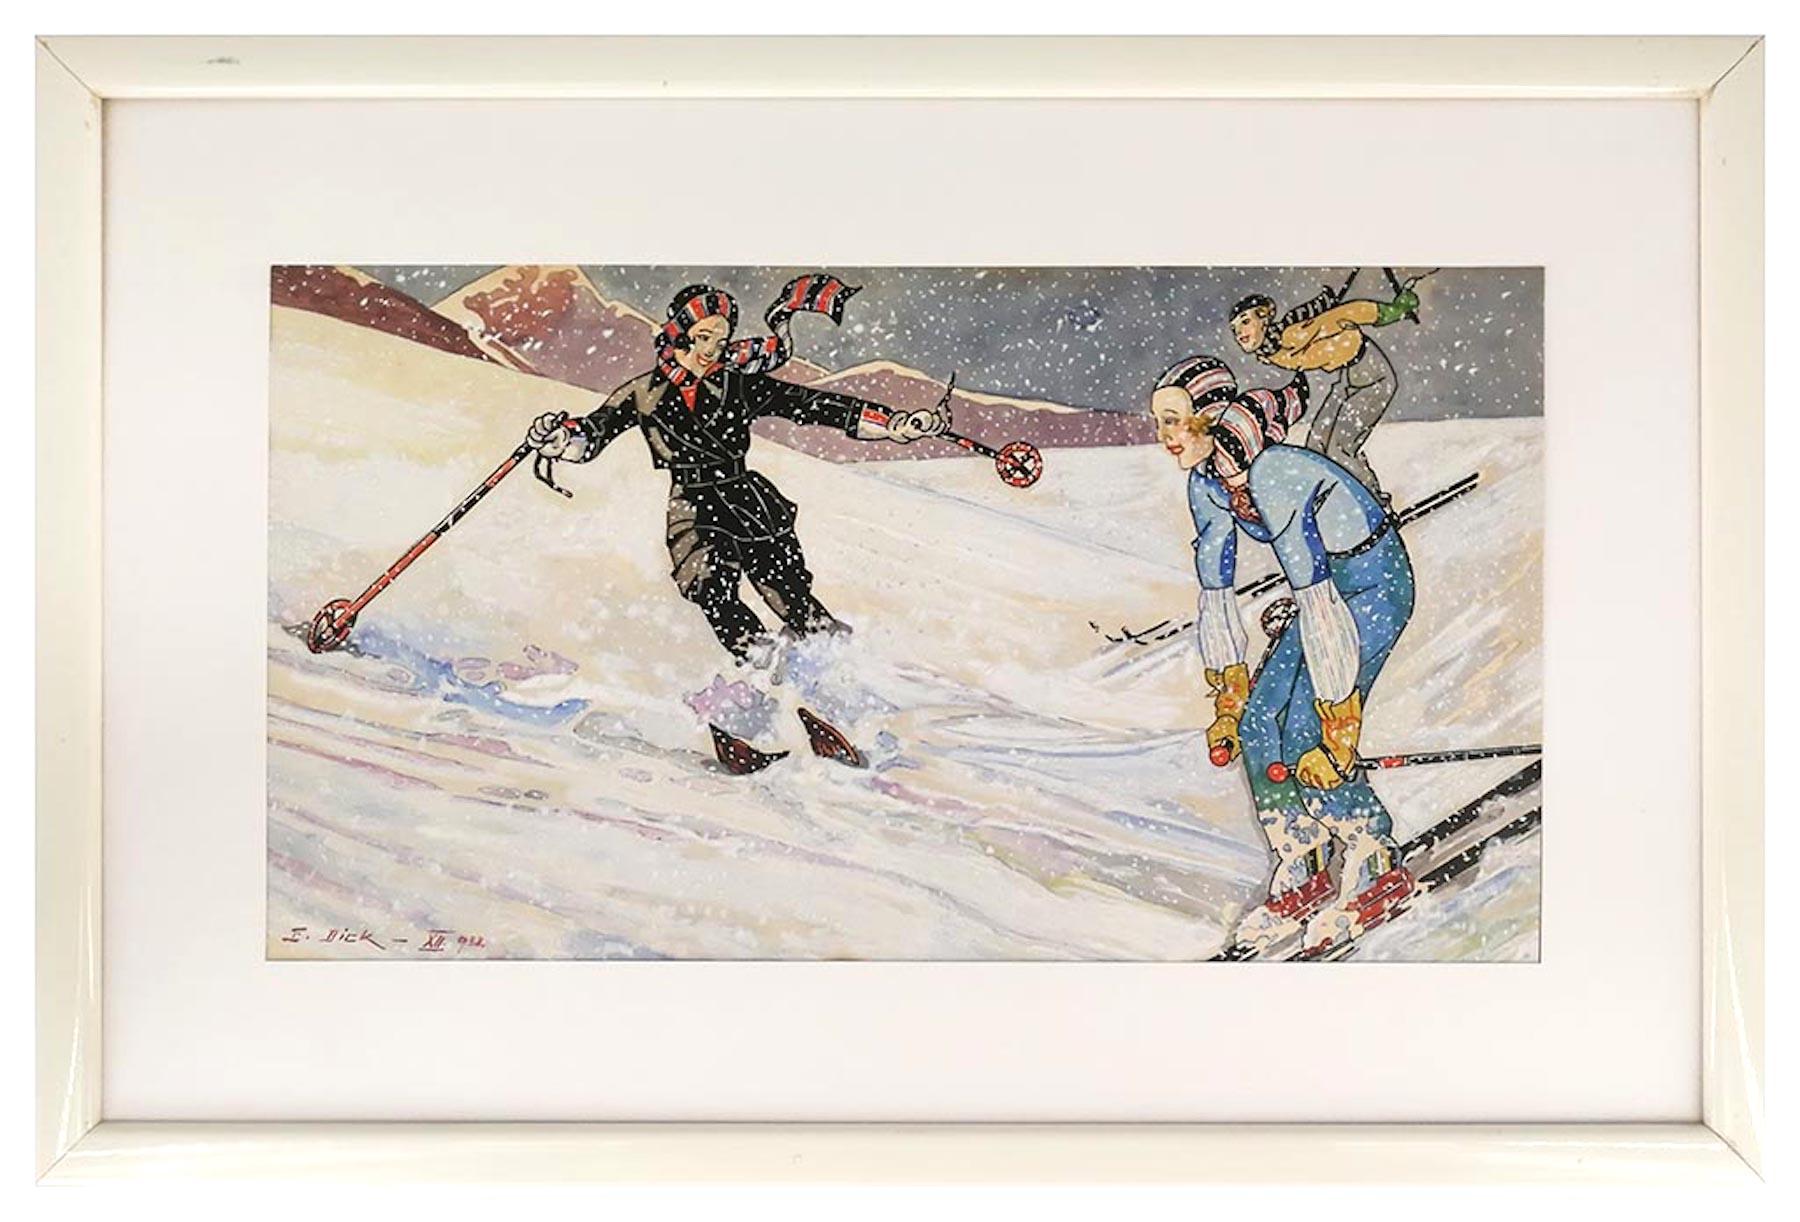 Skiers XII (December) - Original Tempera and Watercolor by Ernesto Dick - 1933